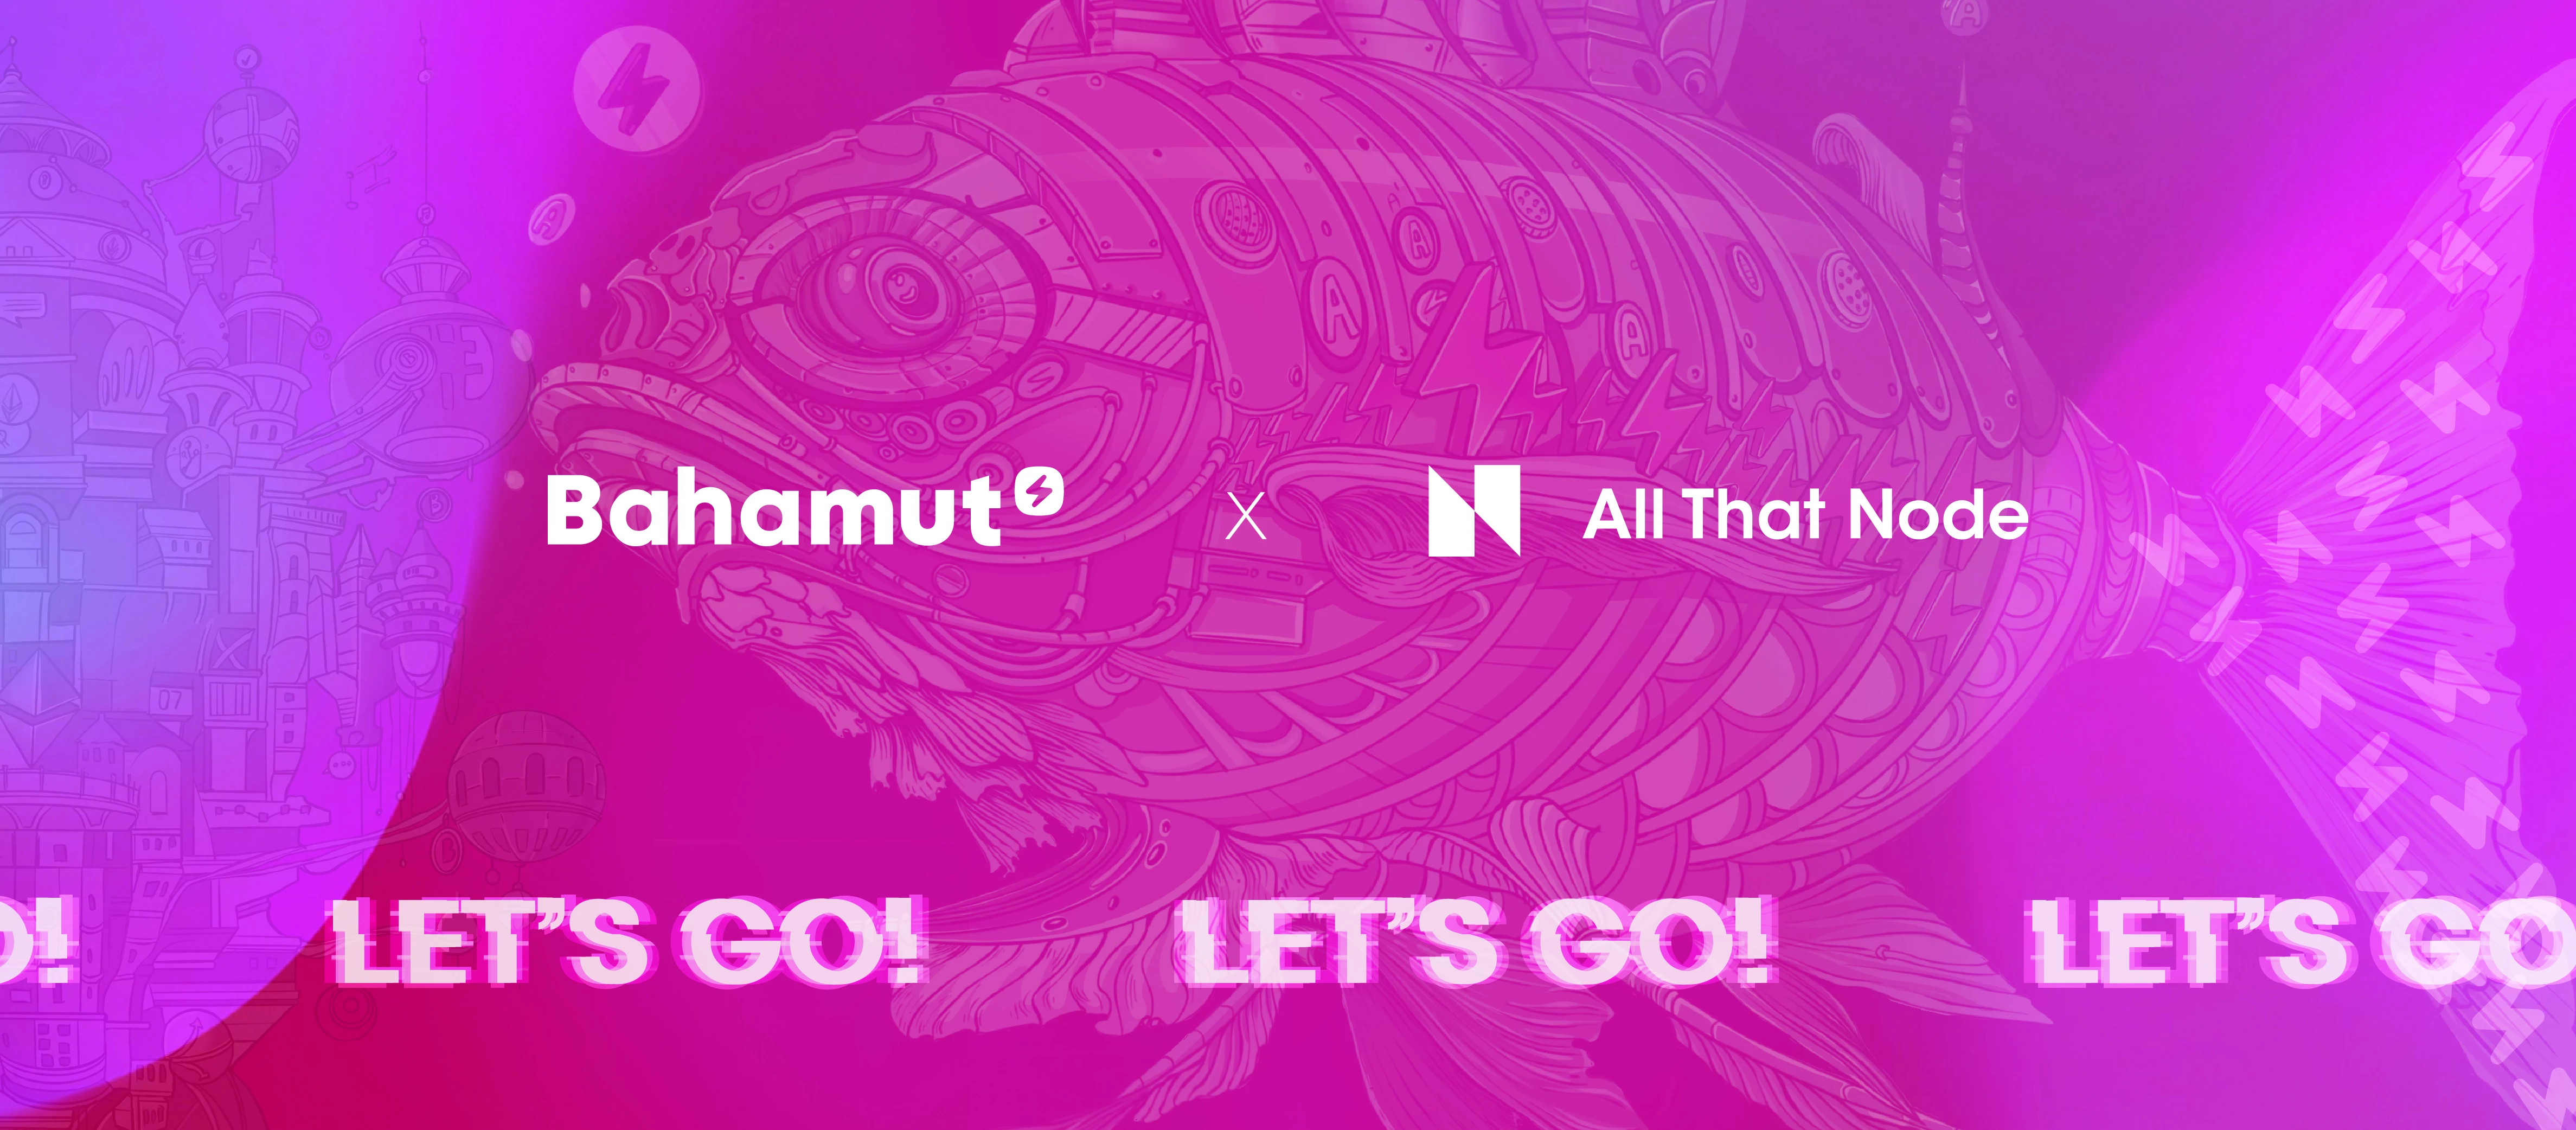 Bahamut partners up with All That Node to unveil new possibilities in Web3. 